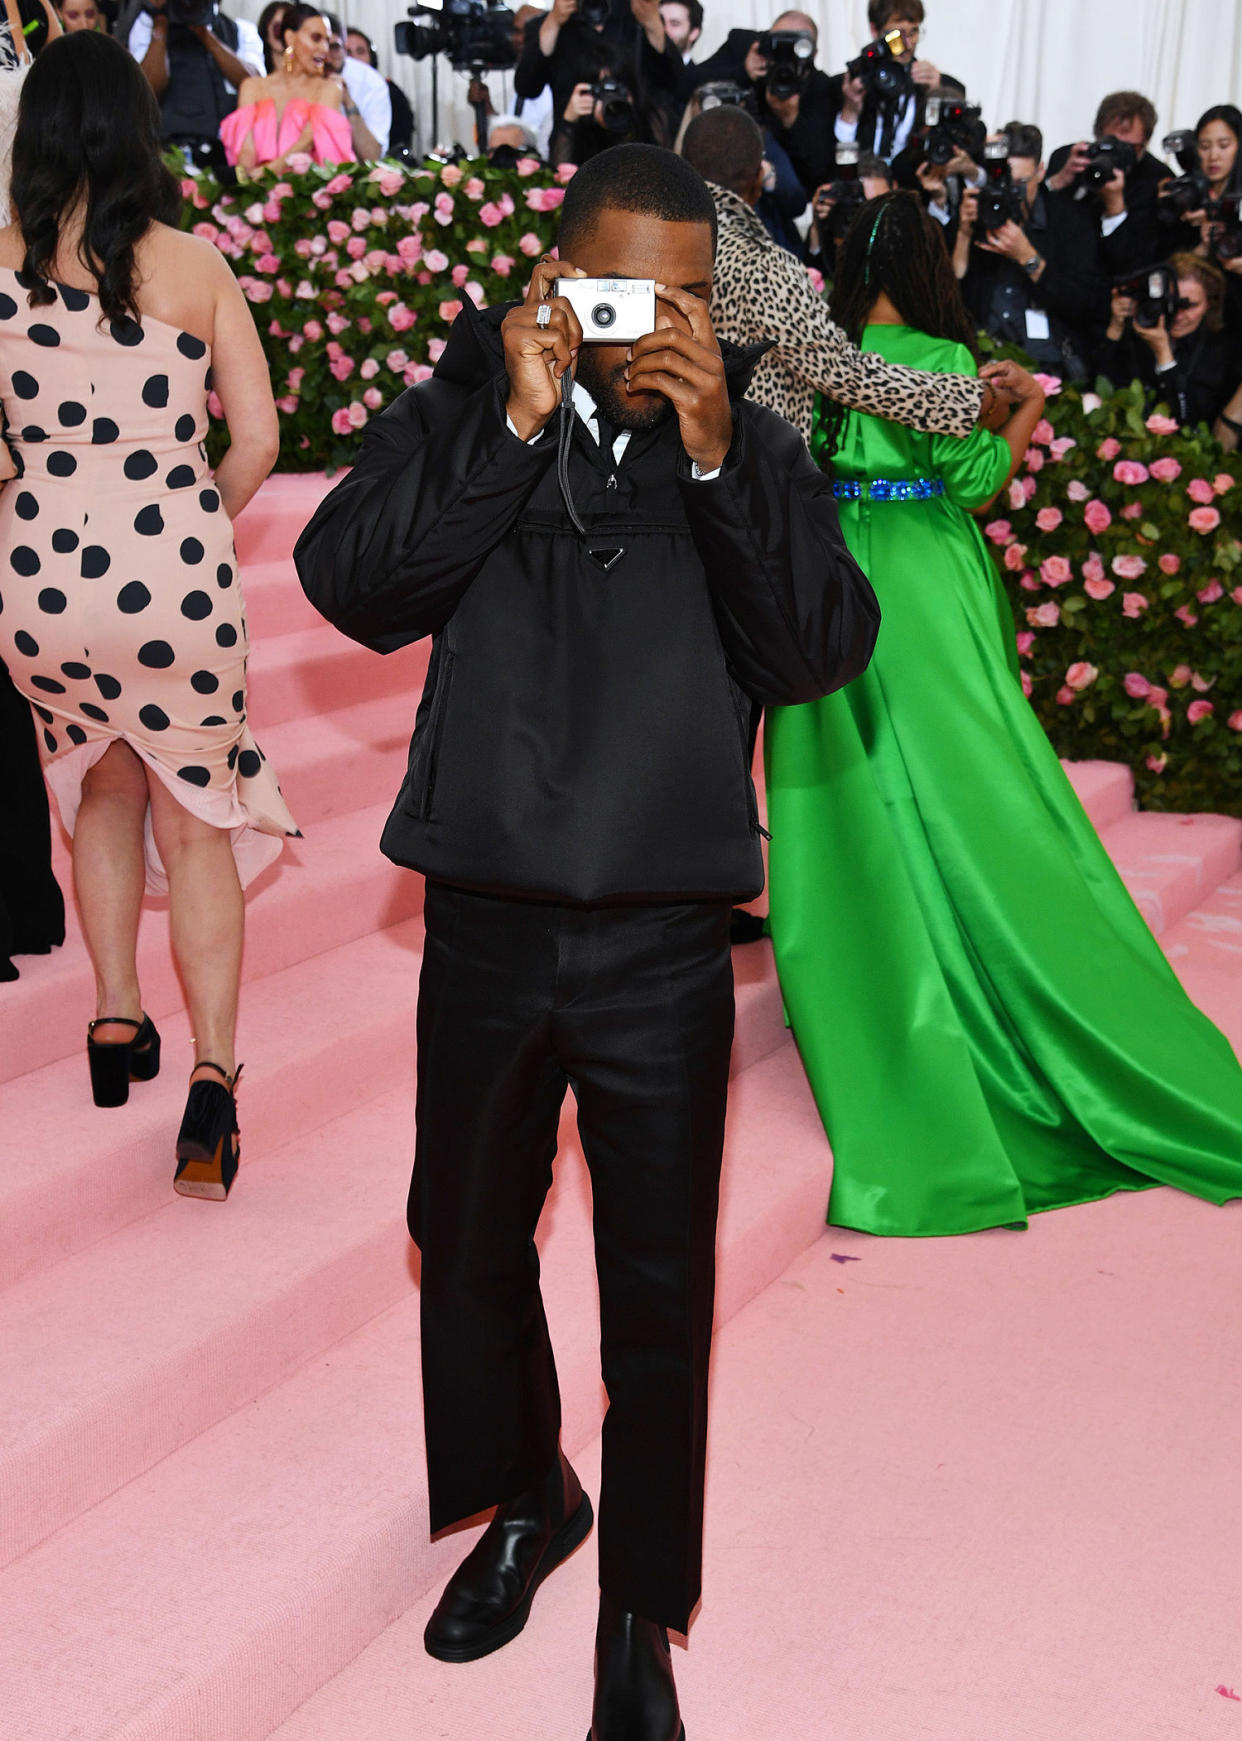 Frank Ocean attends The 2019 Met Gala Celebrating Camp: Notes on Fashion at Metropolitan Museum of Art on May 06, 2019 in New York City.  (Dimitrios Kambouris / Getty Images )